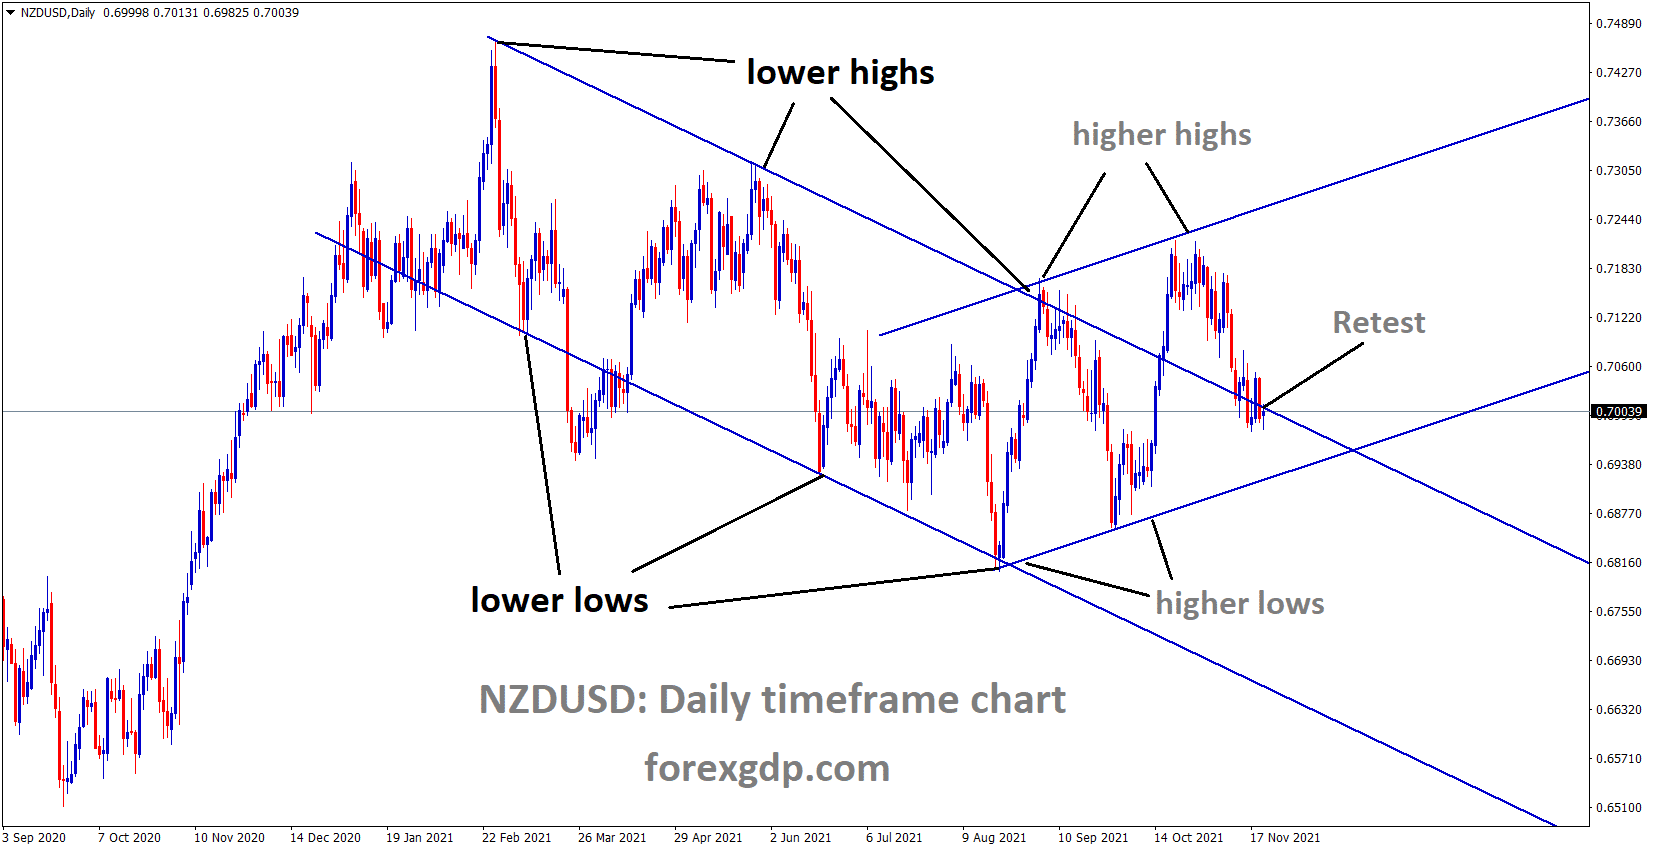 NZDUSD has retested the Descending channel which was previously brokeout.